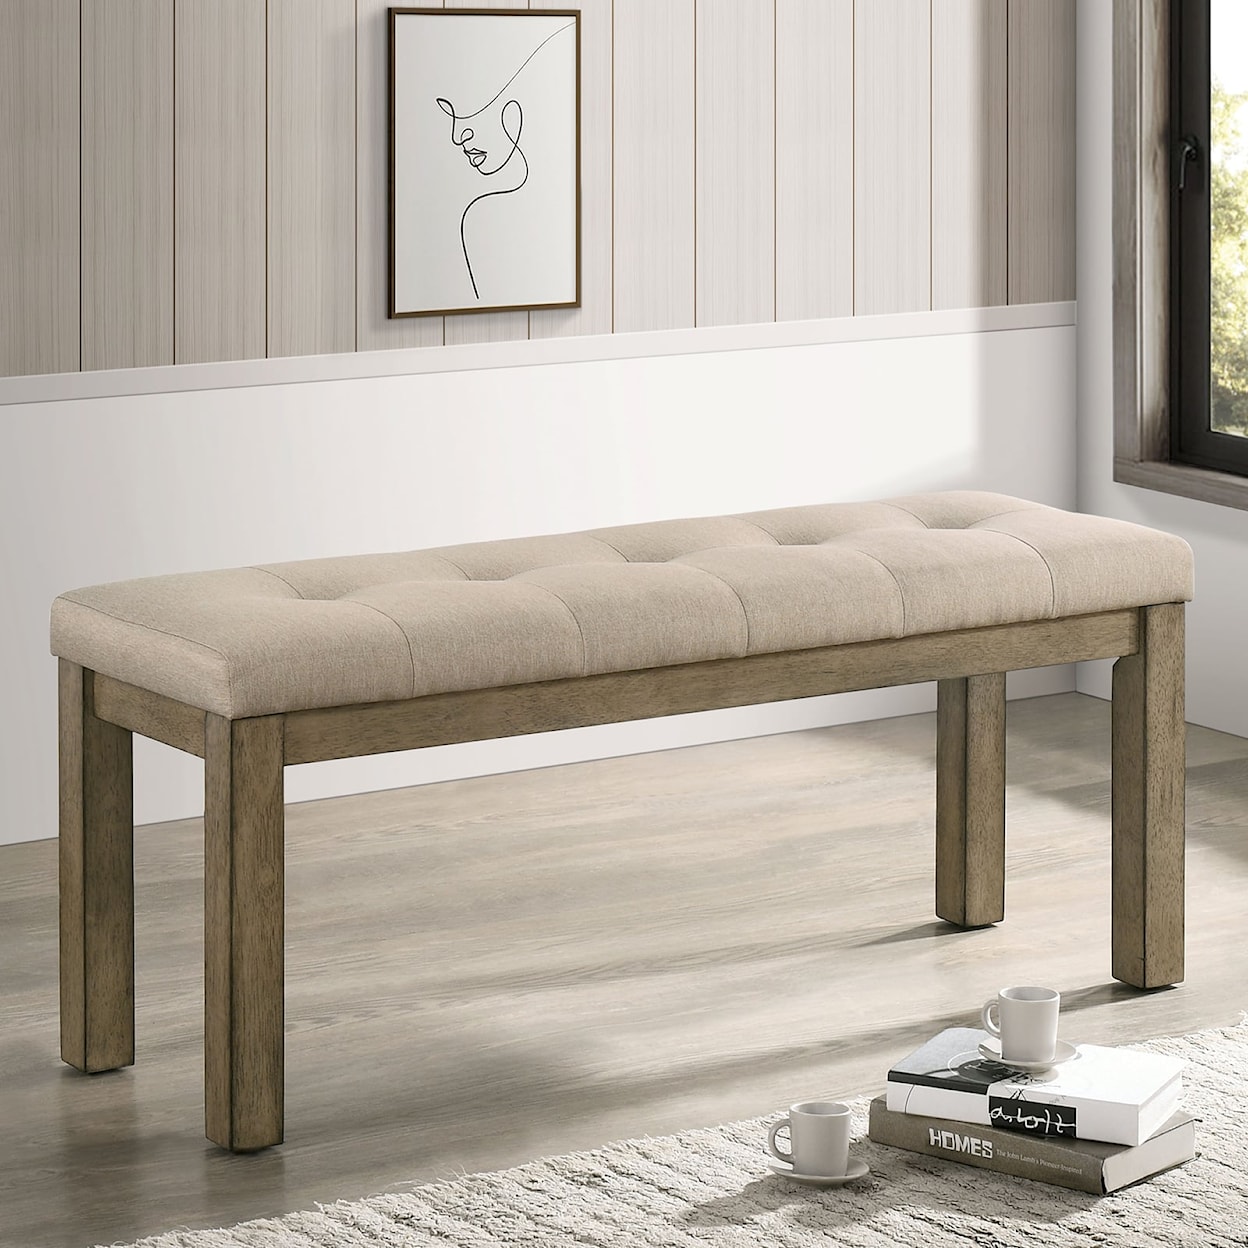 Furniture of America TEMPLEMORE Dining Bench